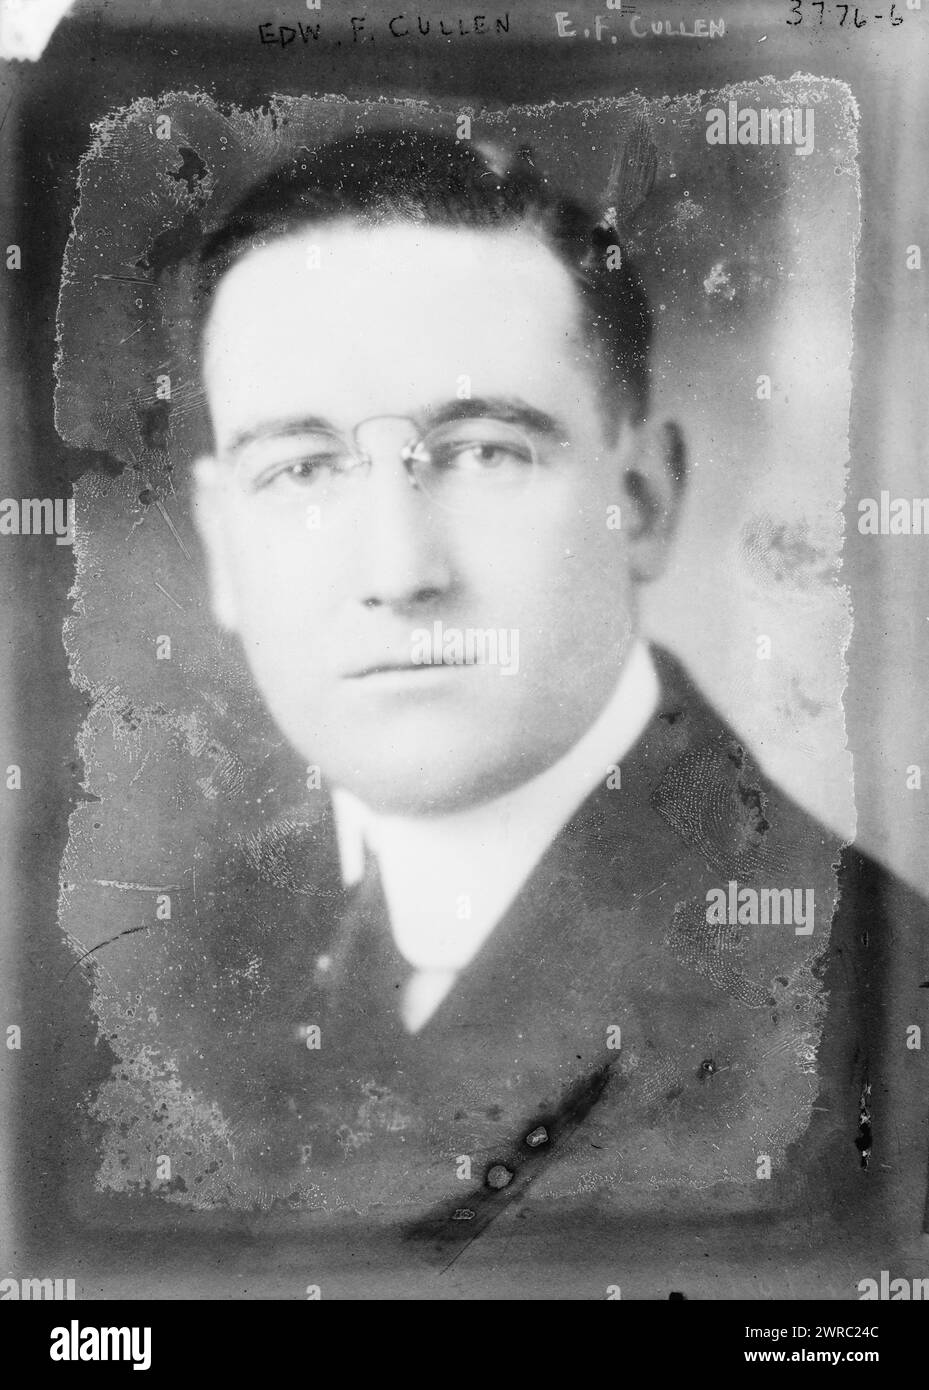 Edw. F. Cullen, Photograph shows Edward F. Cullen, President of the Cullen Barge Company., between ca. 1915 and ca. 1920, Glass negatives, 1 negative: glass Stock Photo